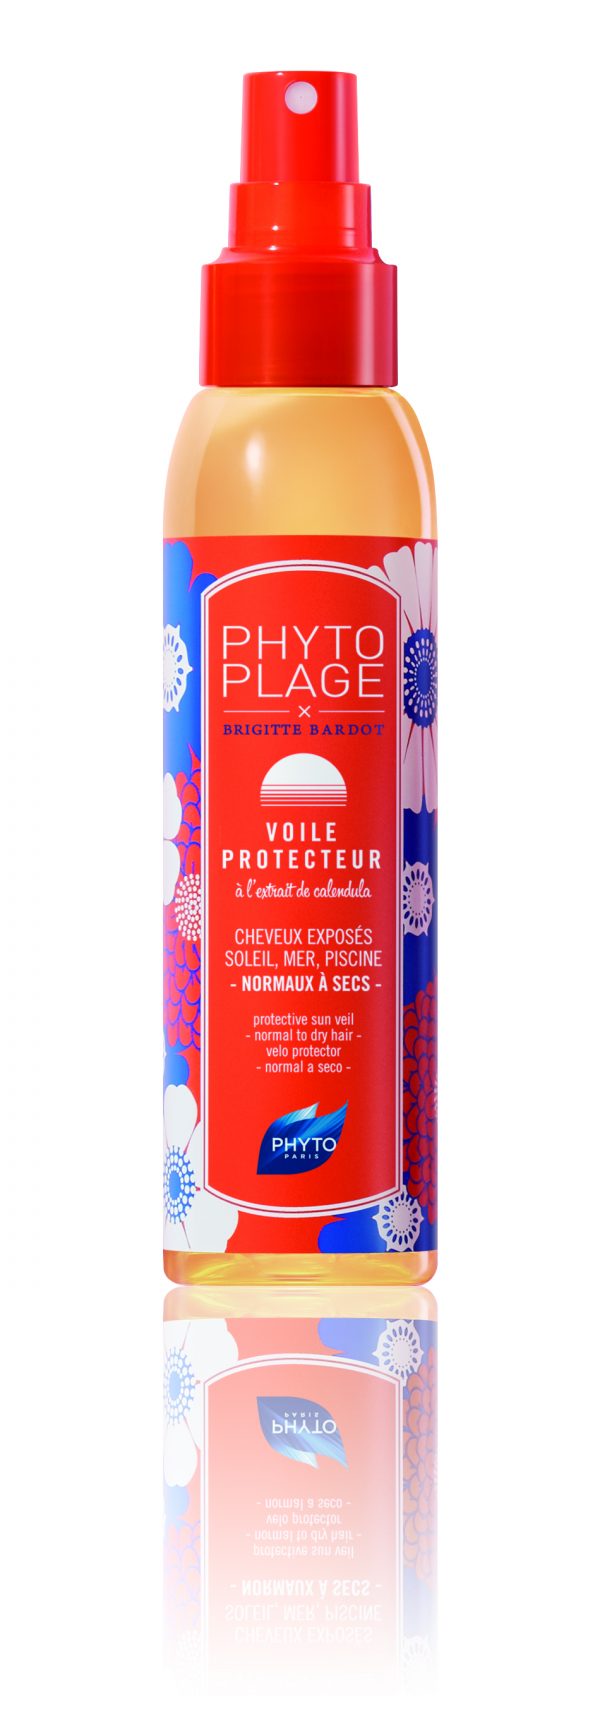 Phytoplage Voile Cap 125ml